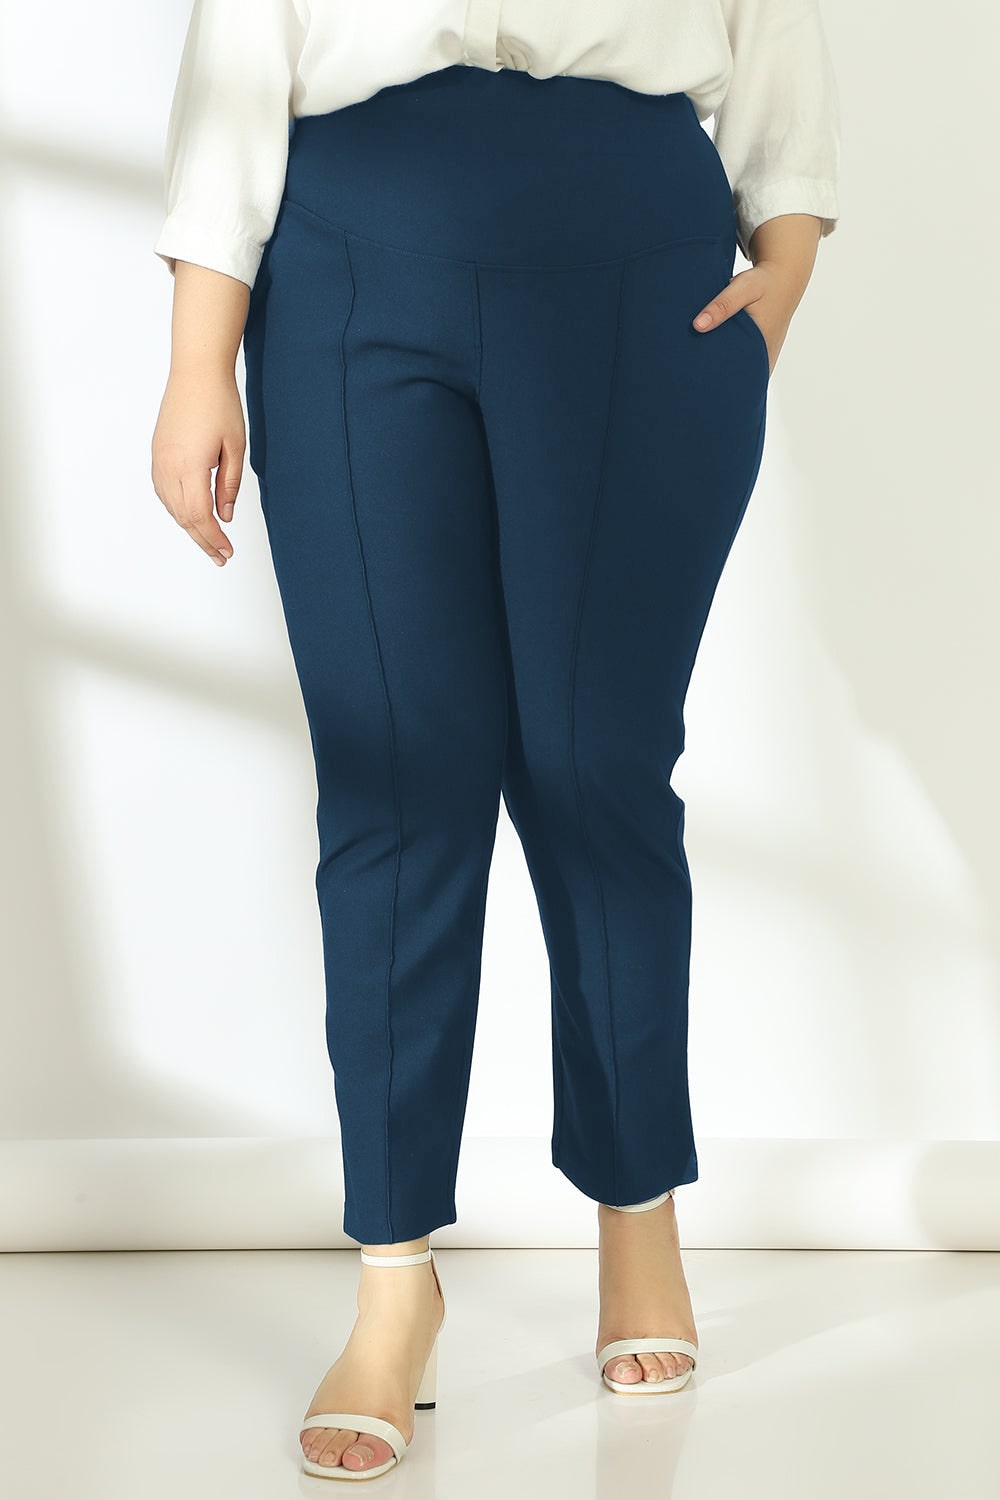 Large Size Womens Tummy Tuck Pants With Hip Lift And Fake Ass For  Postpartum Body Shaping And One Size Beauty Enhancement From Damangguo,  $14.41